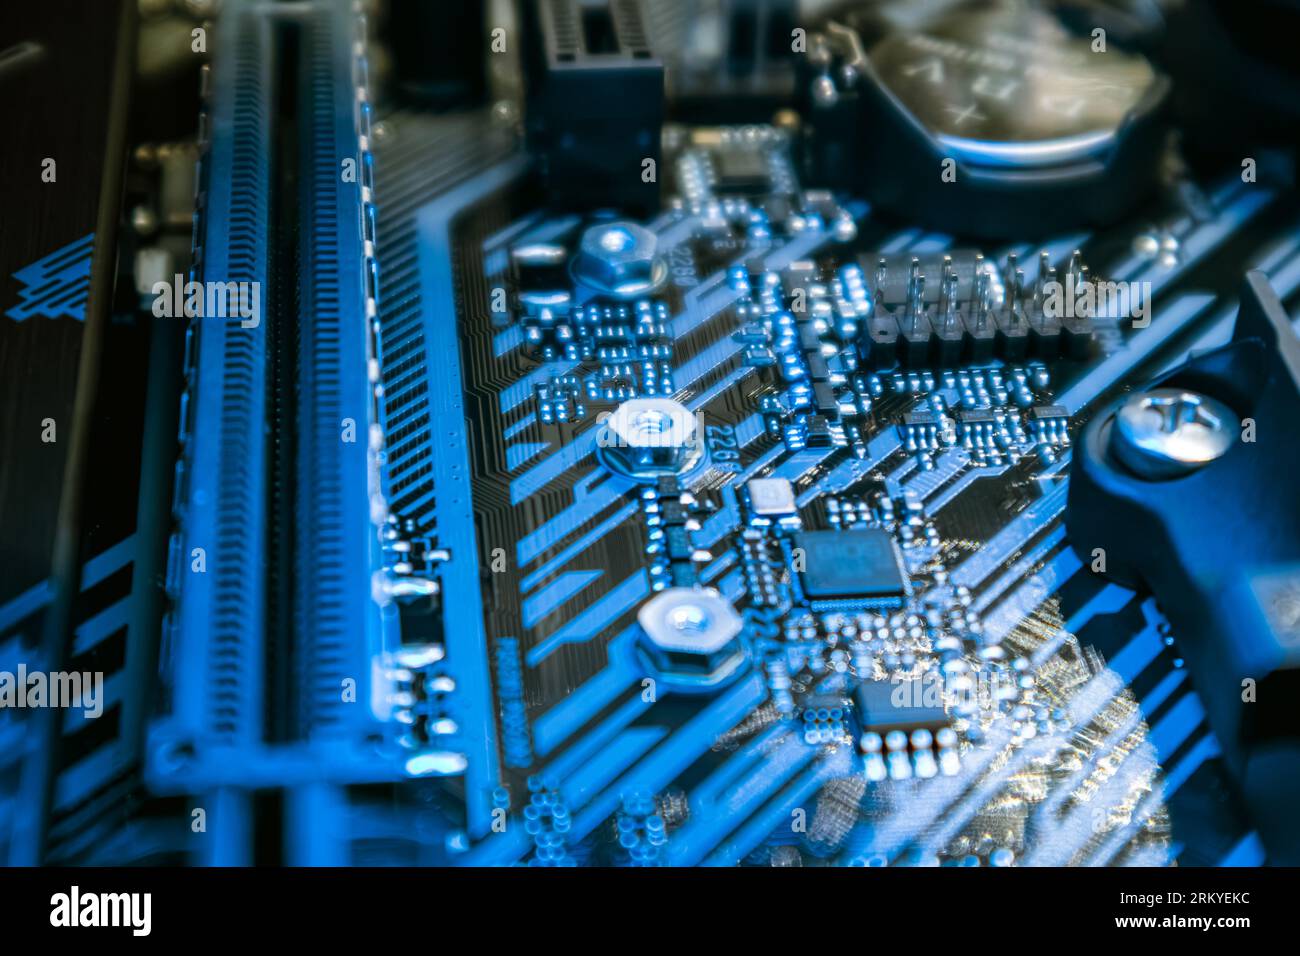 Motherboard with sockets and microchips close-up on modern powerful desktop PC in blue light. Computer hardware chipset components. Tech industry elec Stock Photo